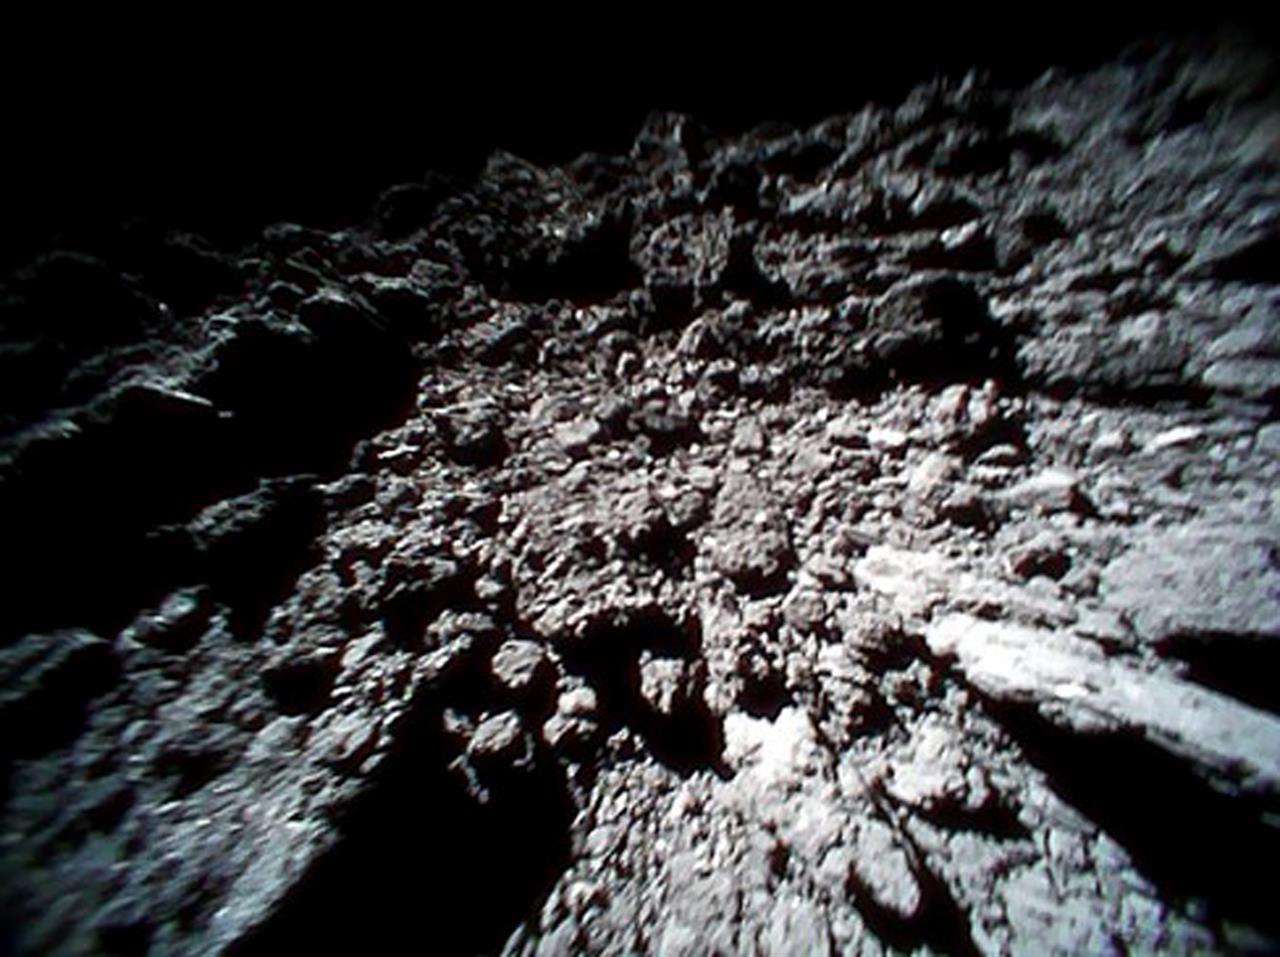 Photos from Japanese space rovers show asteroid is ... rocky | Money 105.5 FM ...1280 x 957